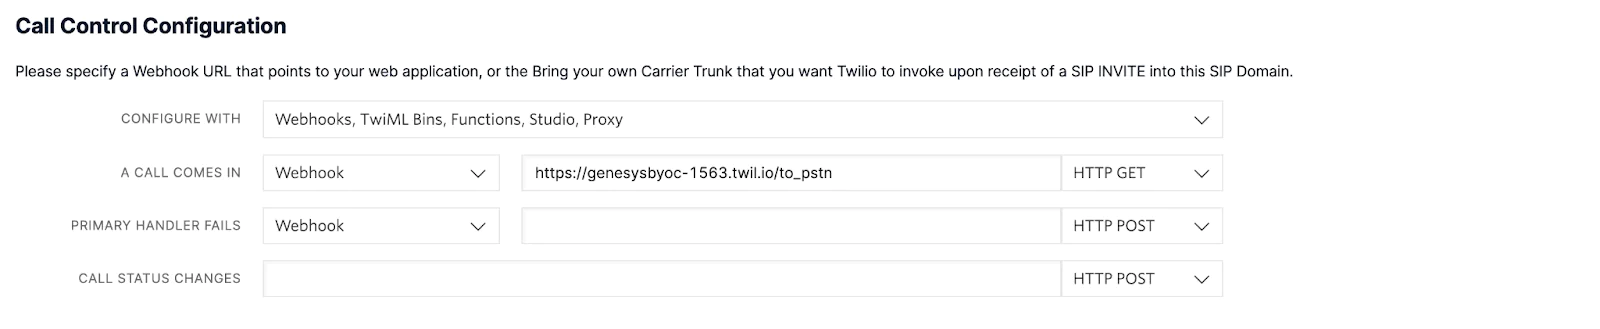 A screenshot of the Call Control Configuration in the Twilio Console, showing a webhook configured for calls coming in.